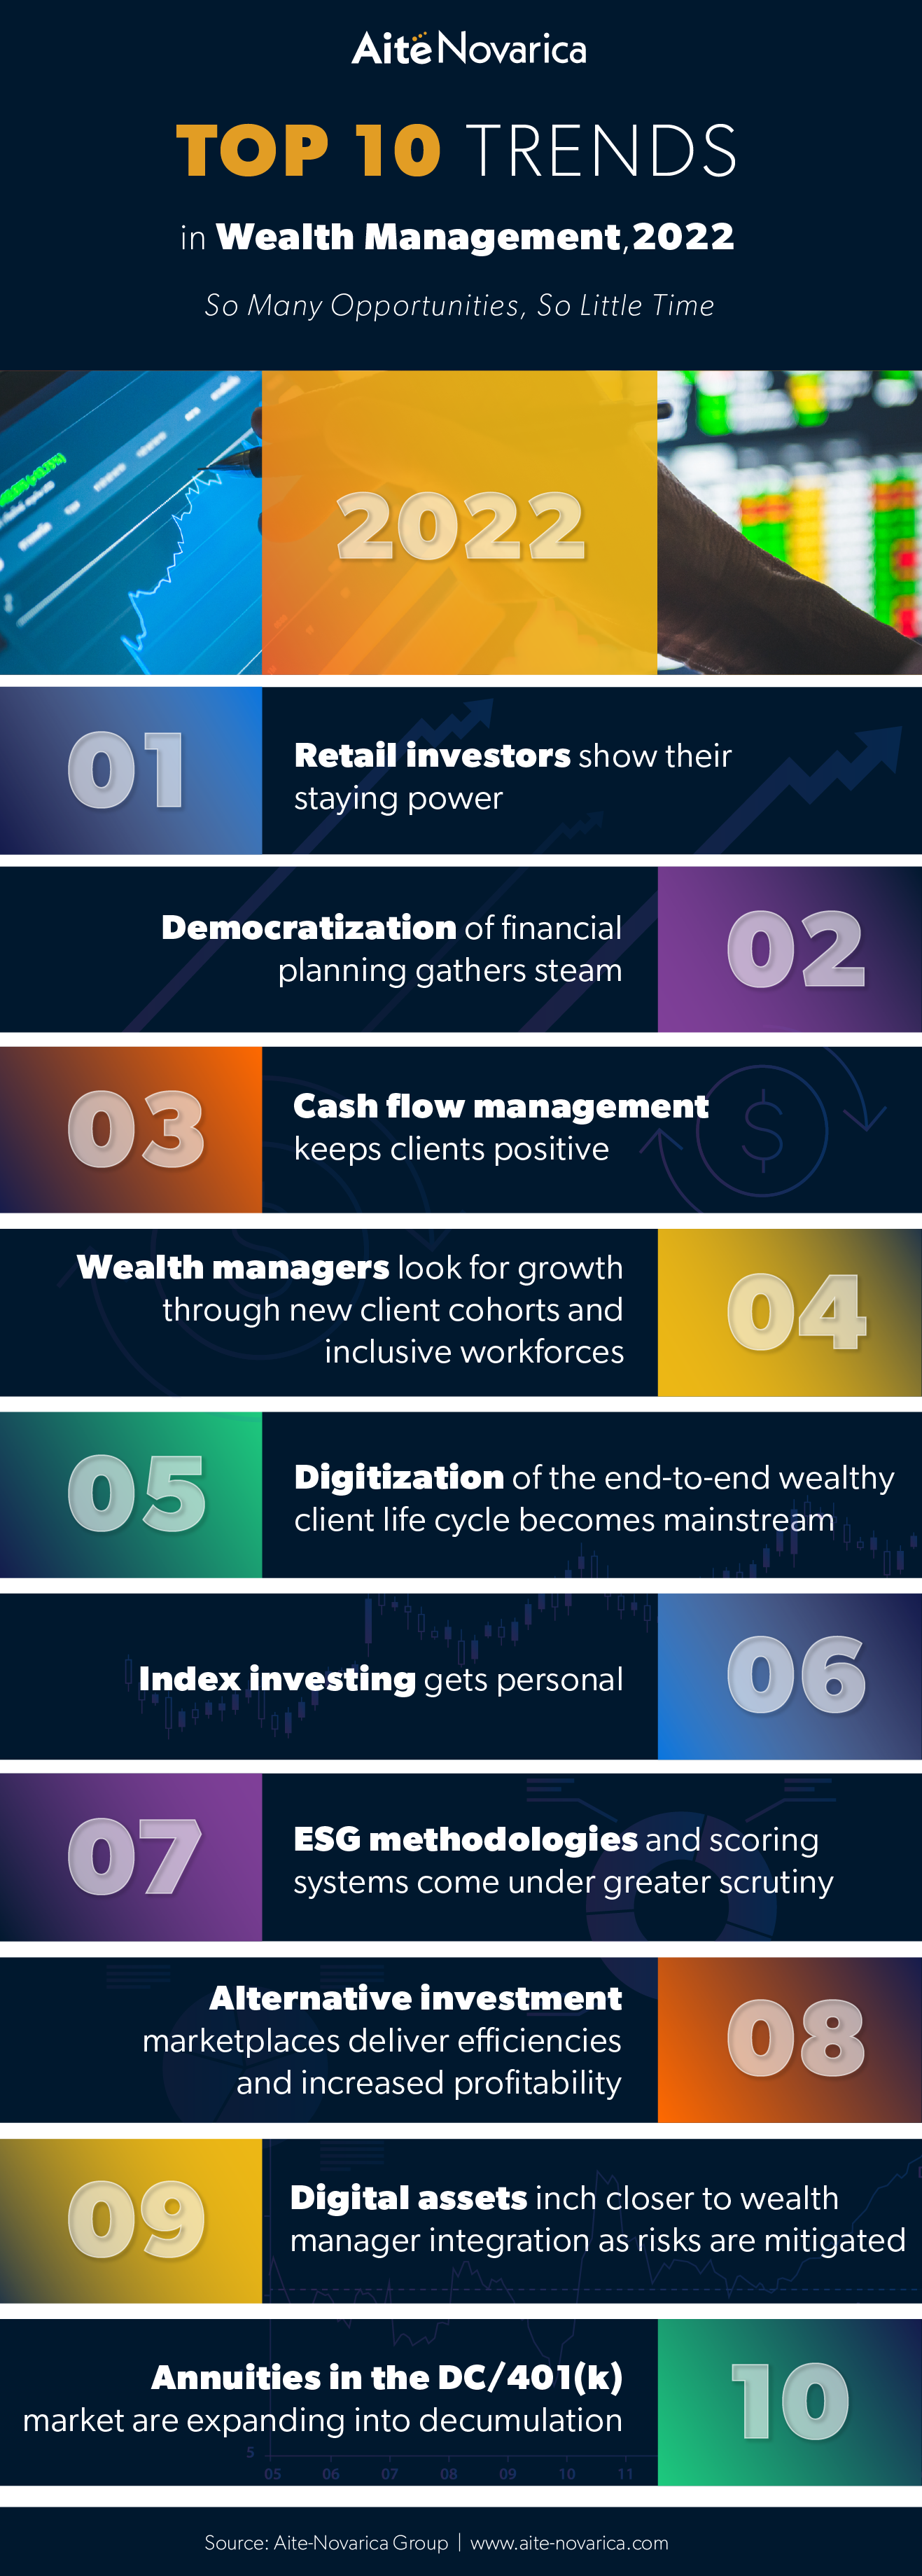 Top 10 Trends in Wealth Management, 2022 So Many Opportunities, So